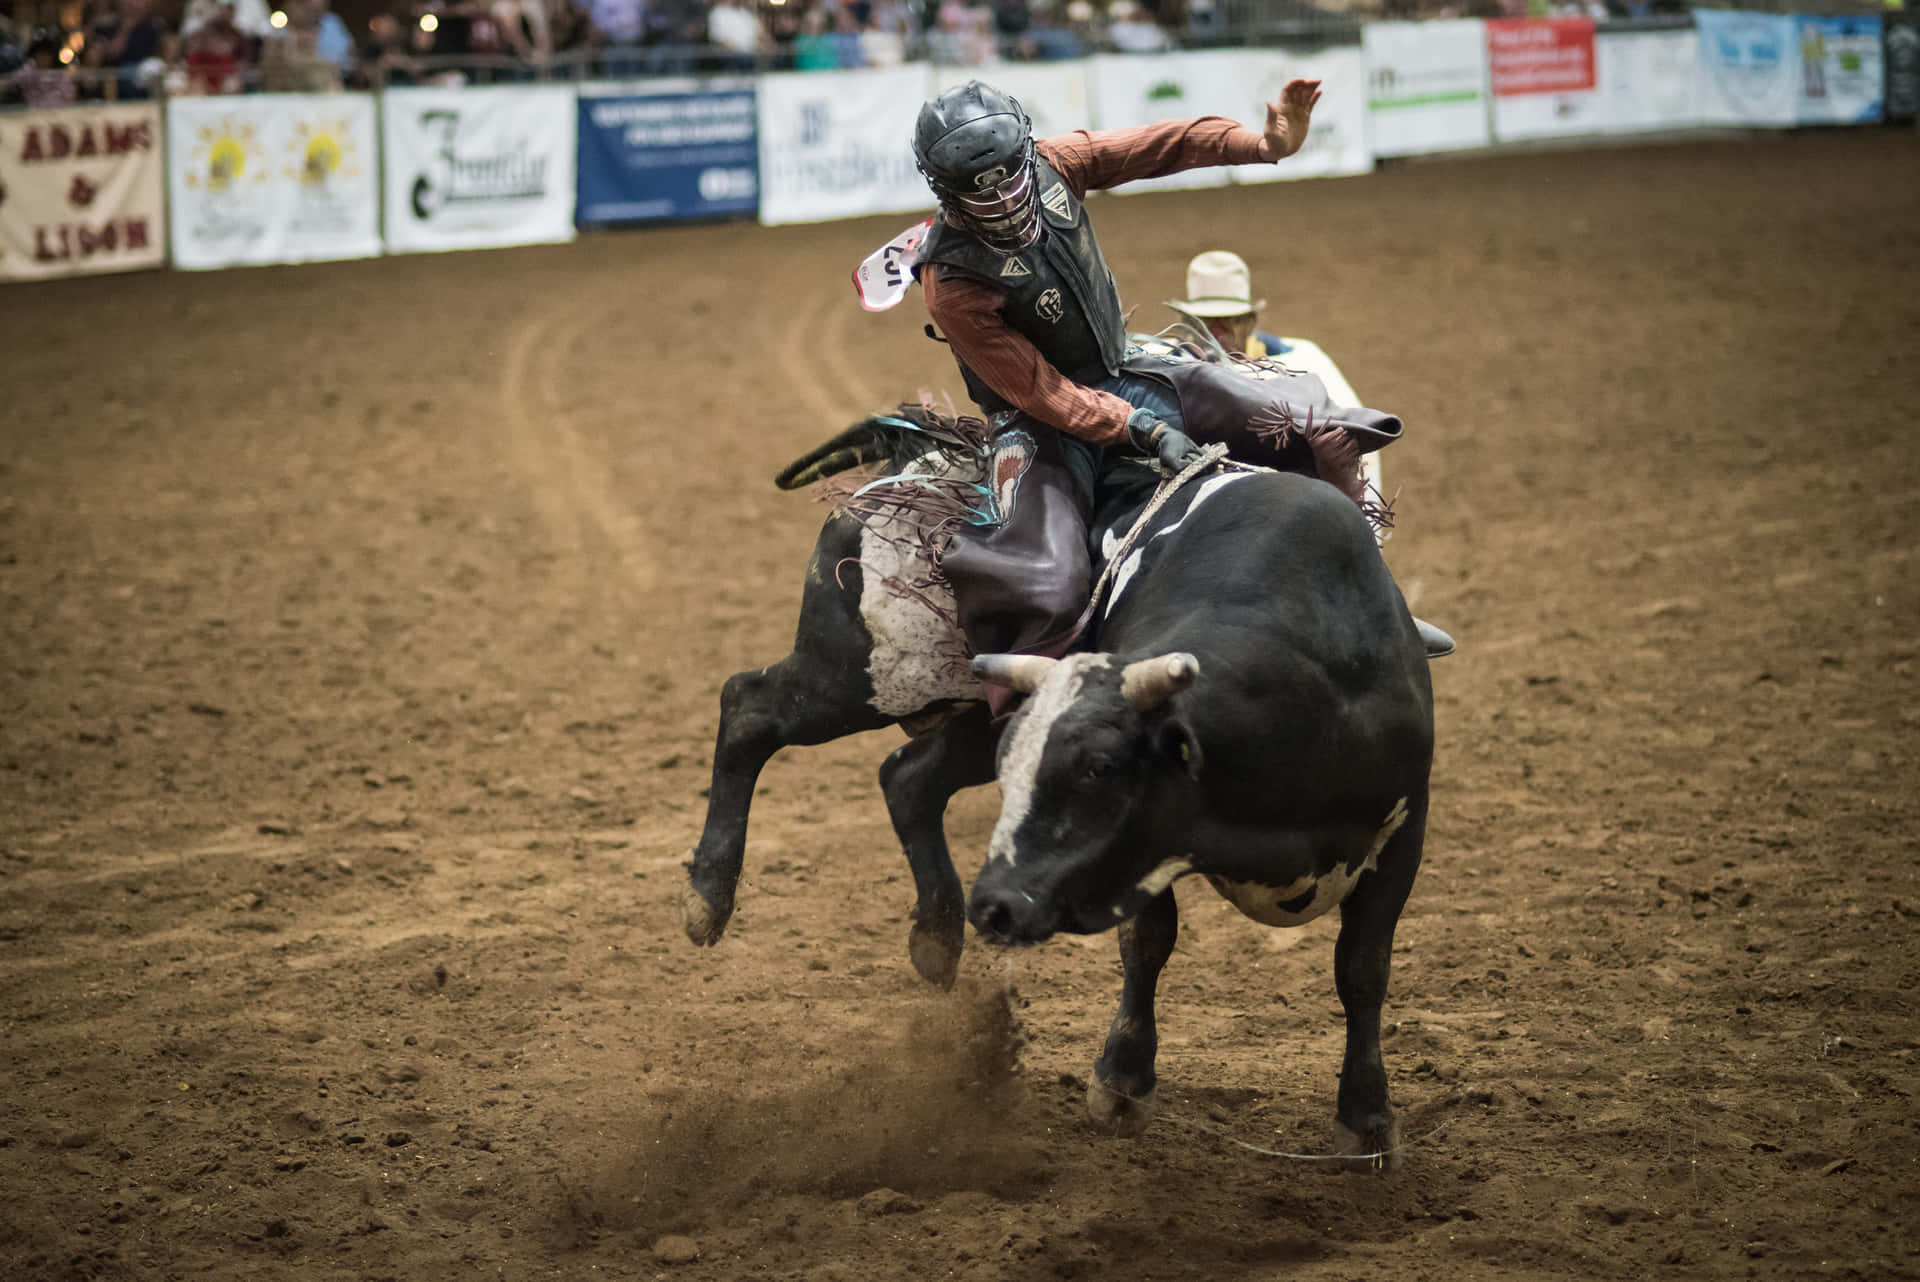 Action-packed rodeo event at a crowded arena